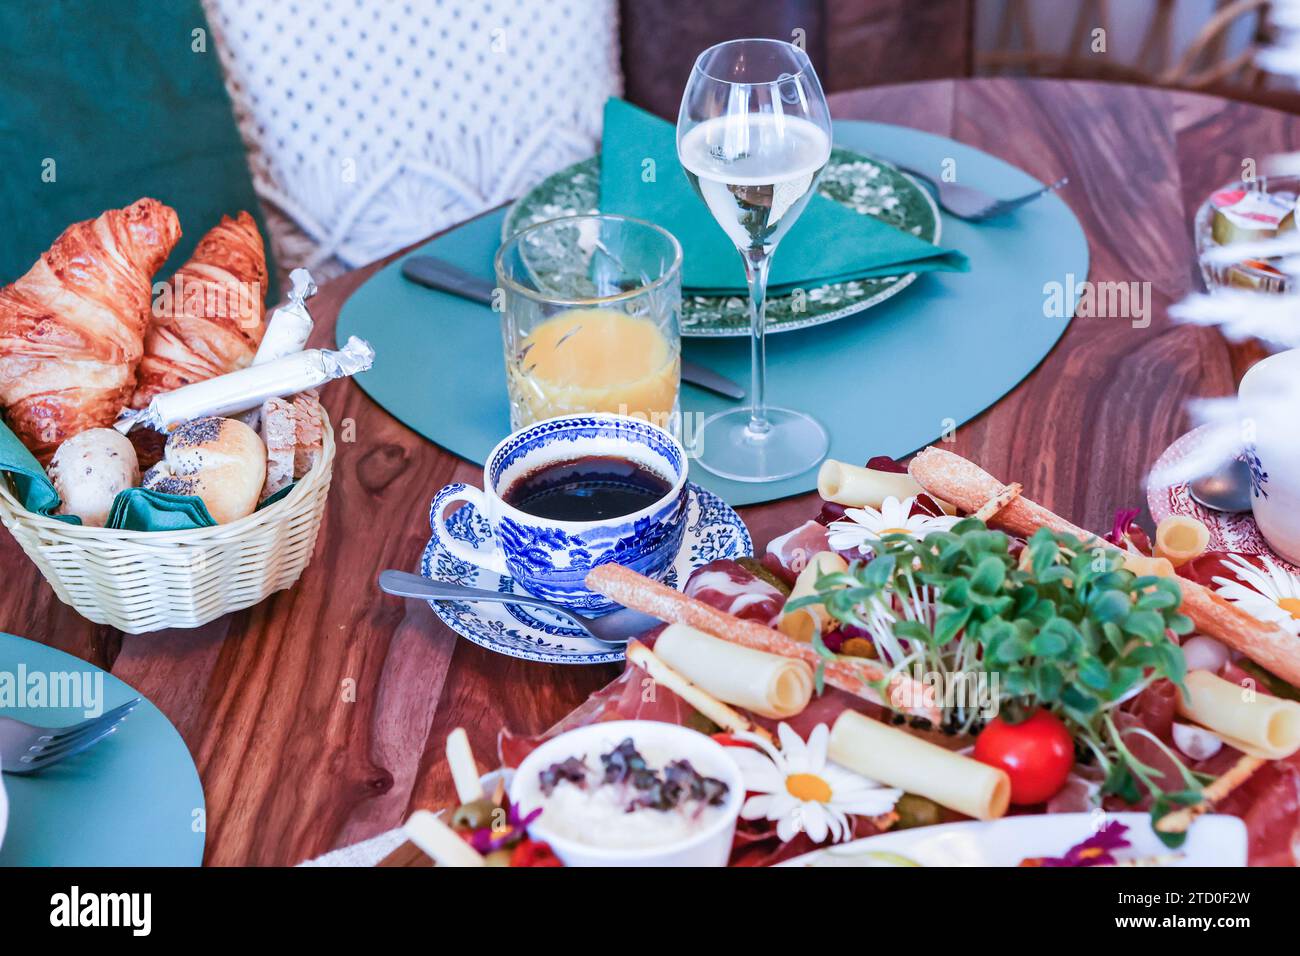 A well-appointed brunch table featuring a variety of foods including fresh croissants, cold cuts, and cheese, accompanied by coffee, juice, and wine. Stock Photo